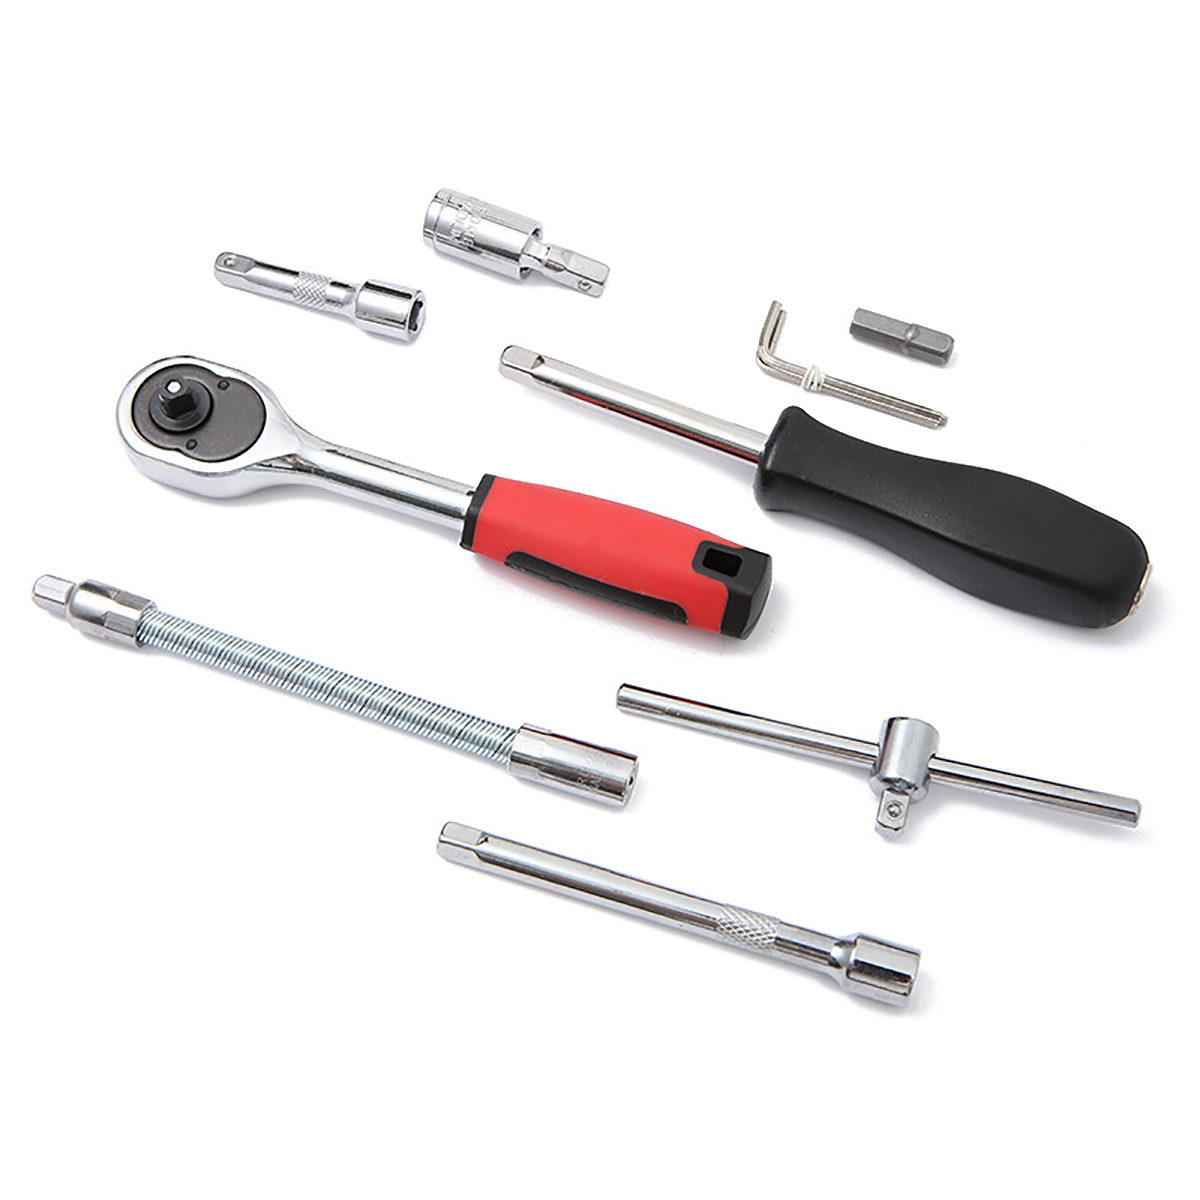 14-Inch-Drive-Socket-Ratchet-Wrench-Socket-Bit-Combination-Tools-Kit-For-Auto-Repairing--Household-1715247-7